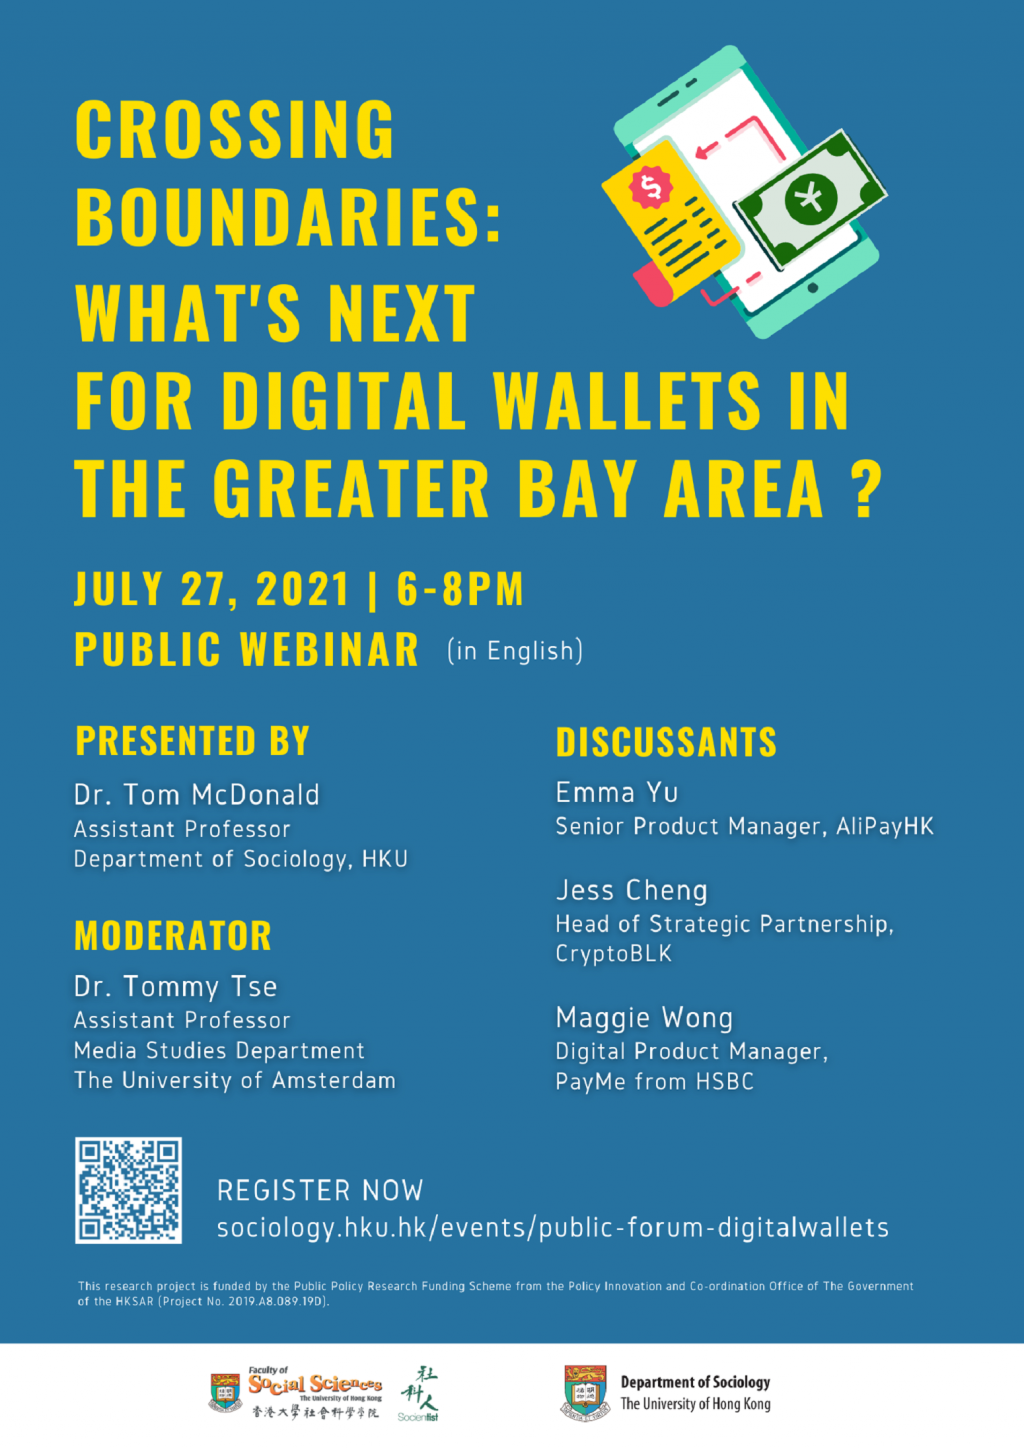 Public Webinar - Crossing Boundaries: What's next for digital wallets in the Greater Bay Area?